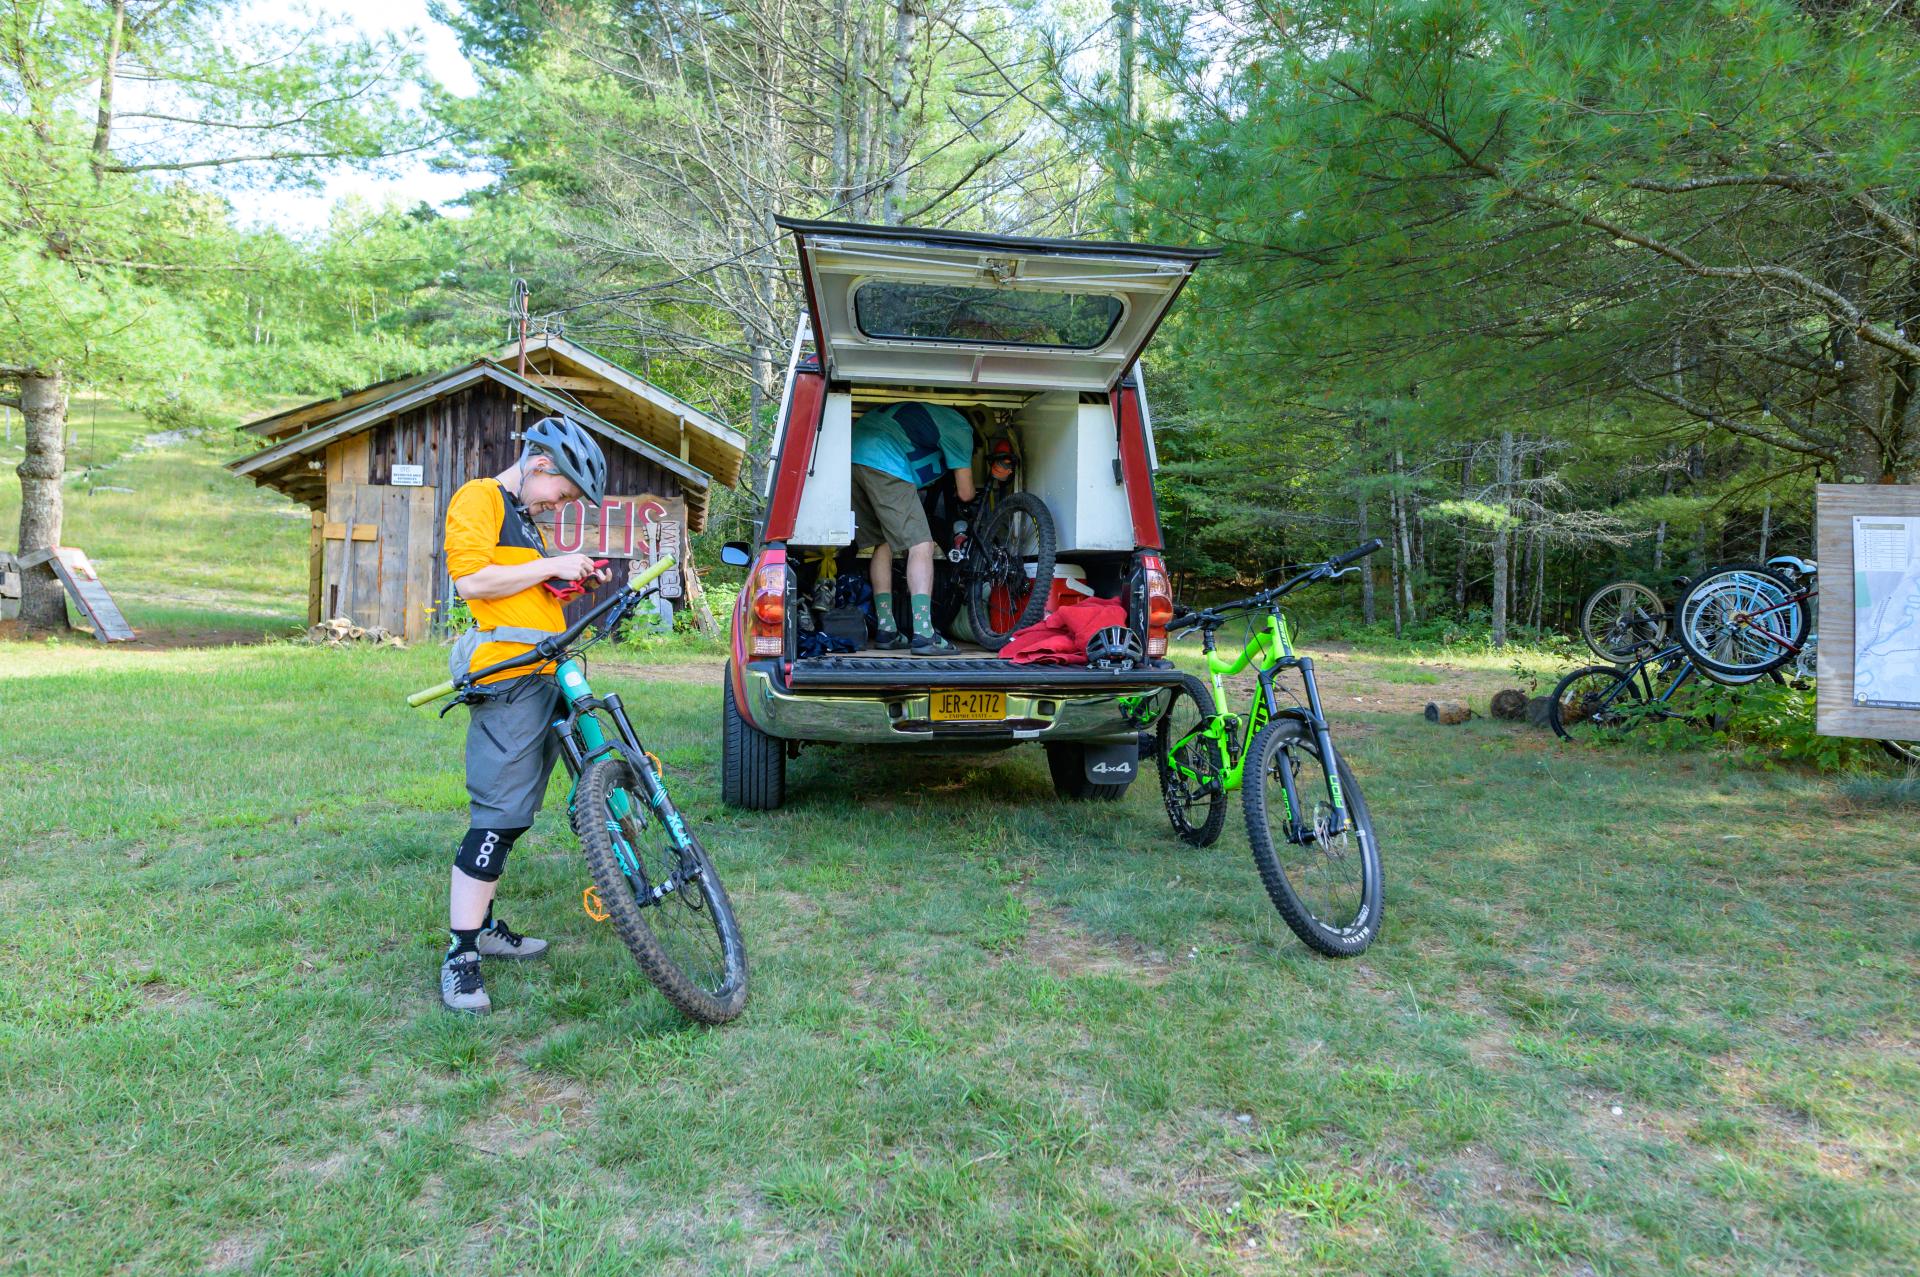 Two mountain bikers prep for a ride beside their vehicle